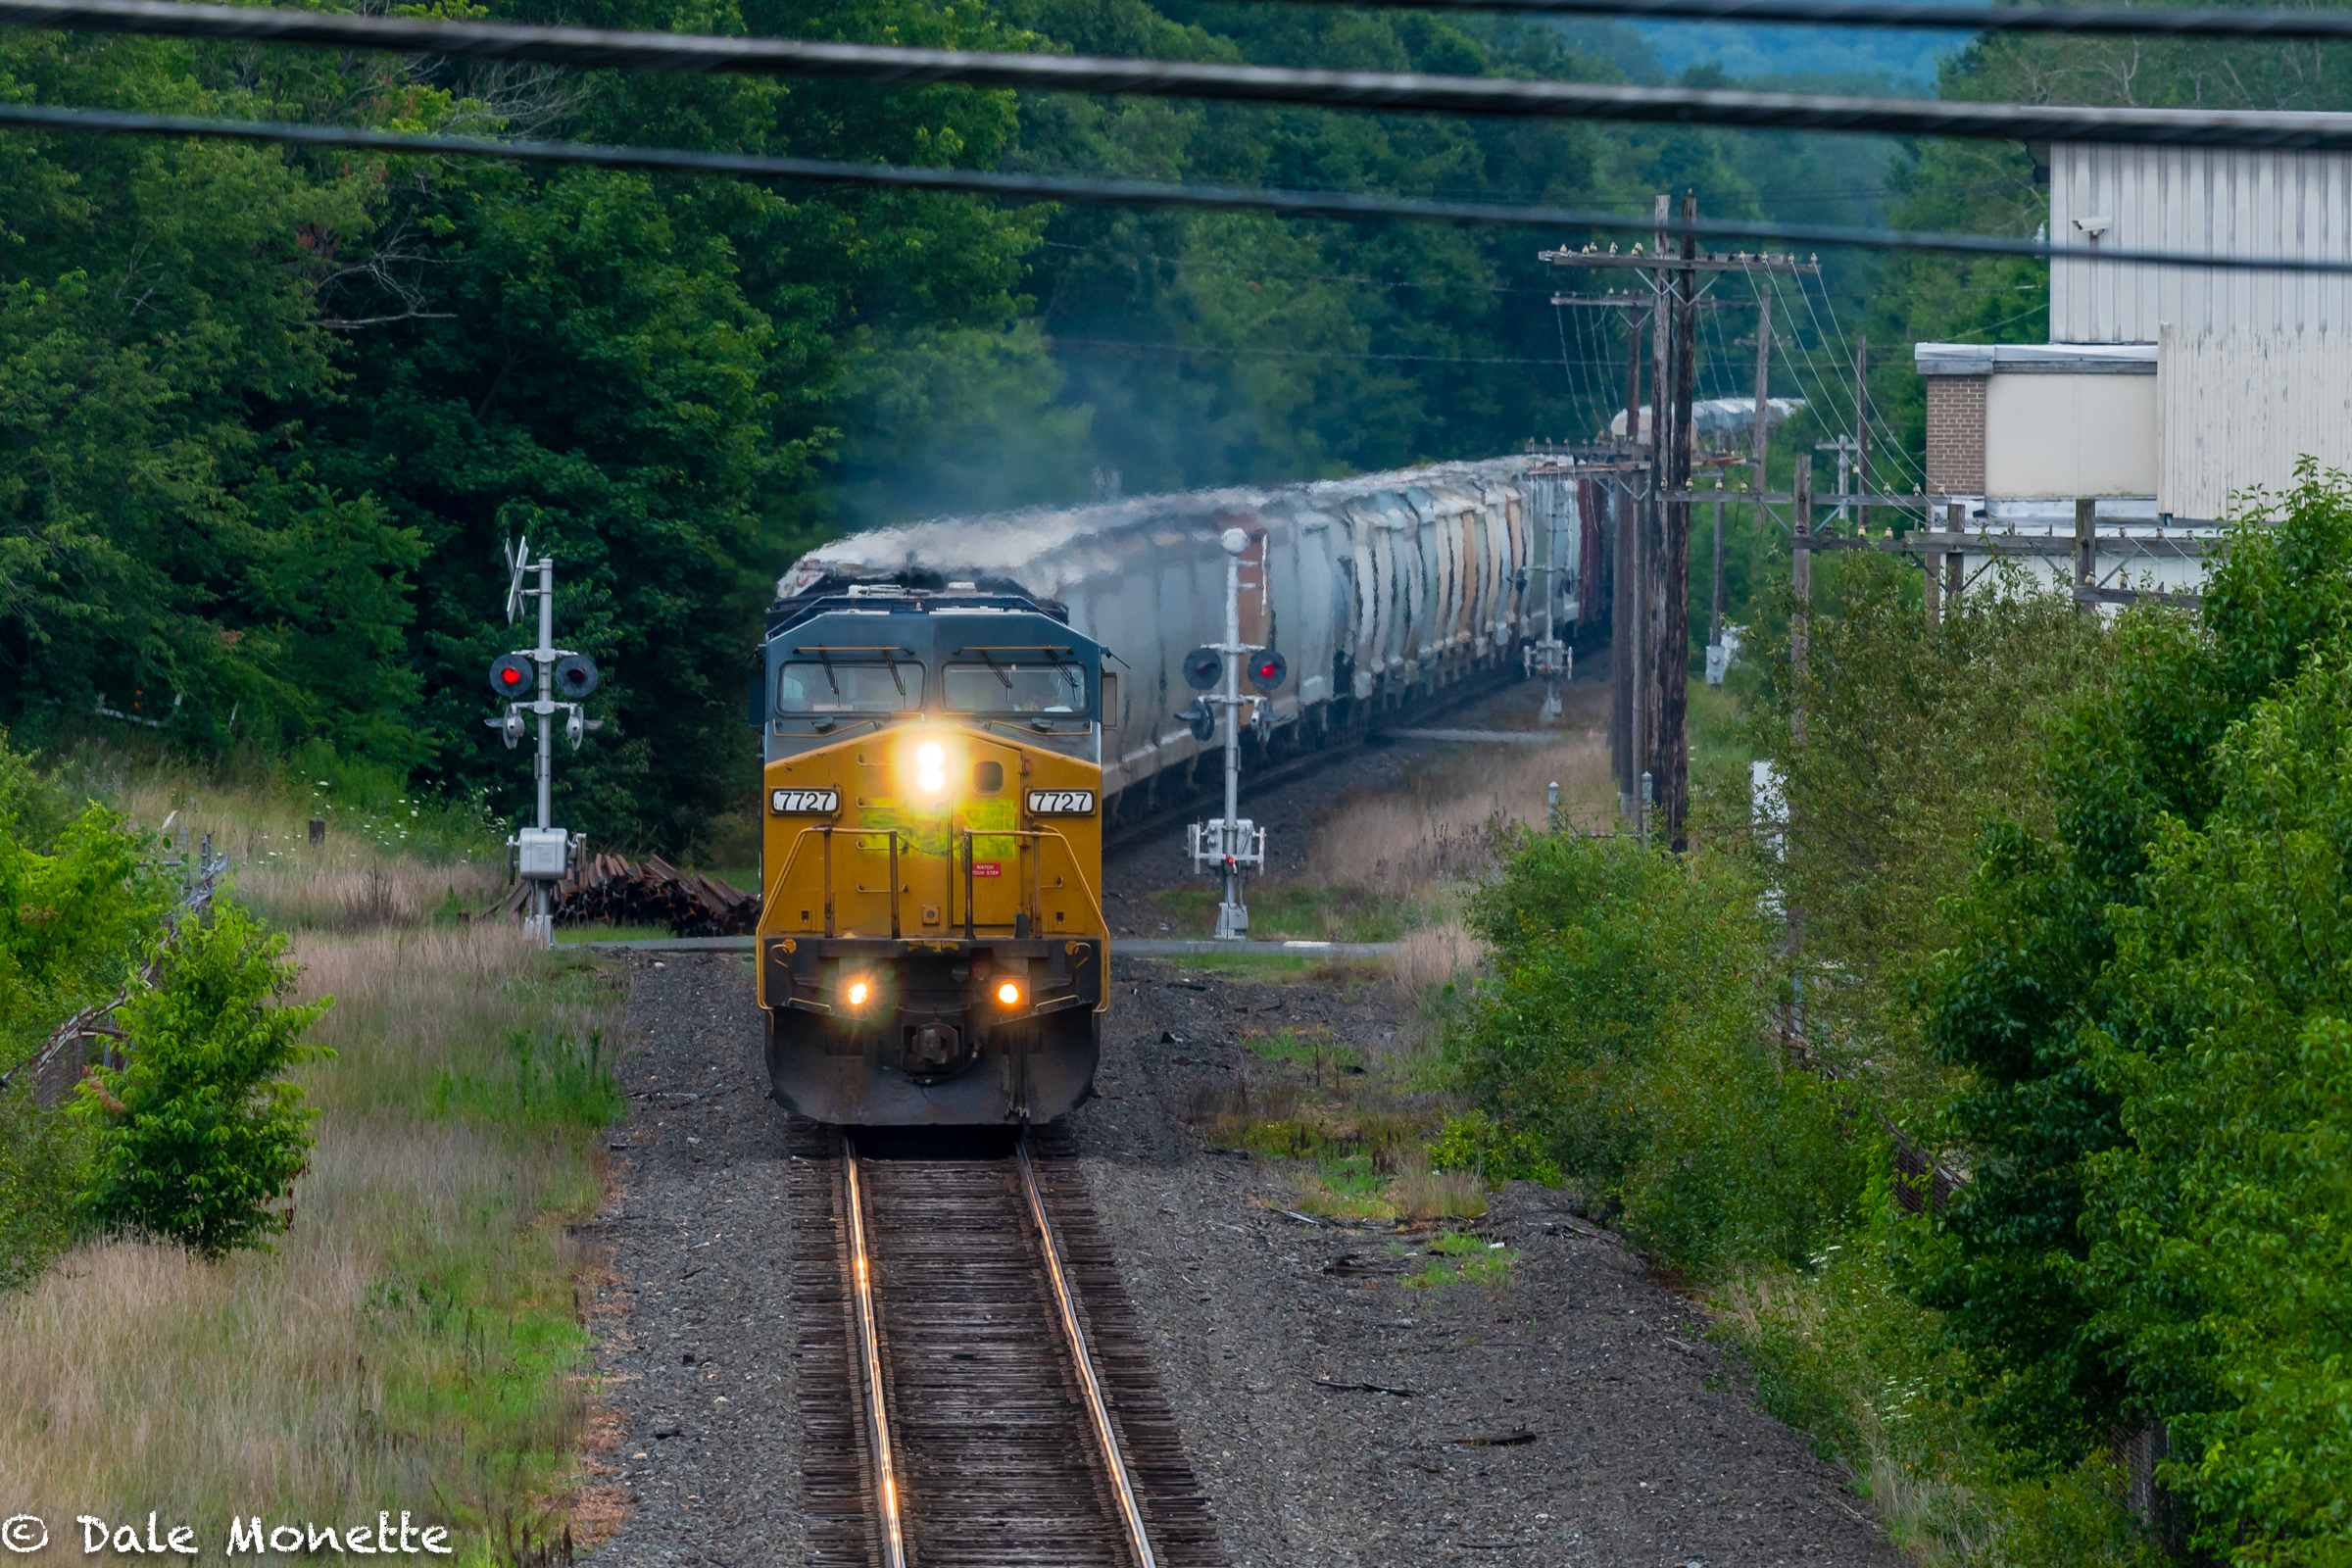   Its been a while since I took a railroad photo. Pan Am RR heading west thru Orange MA.  